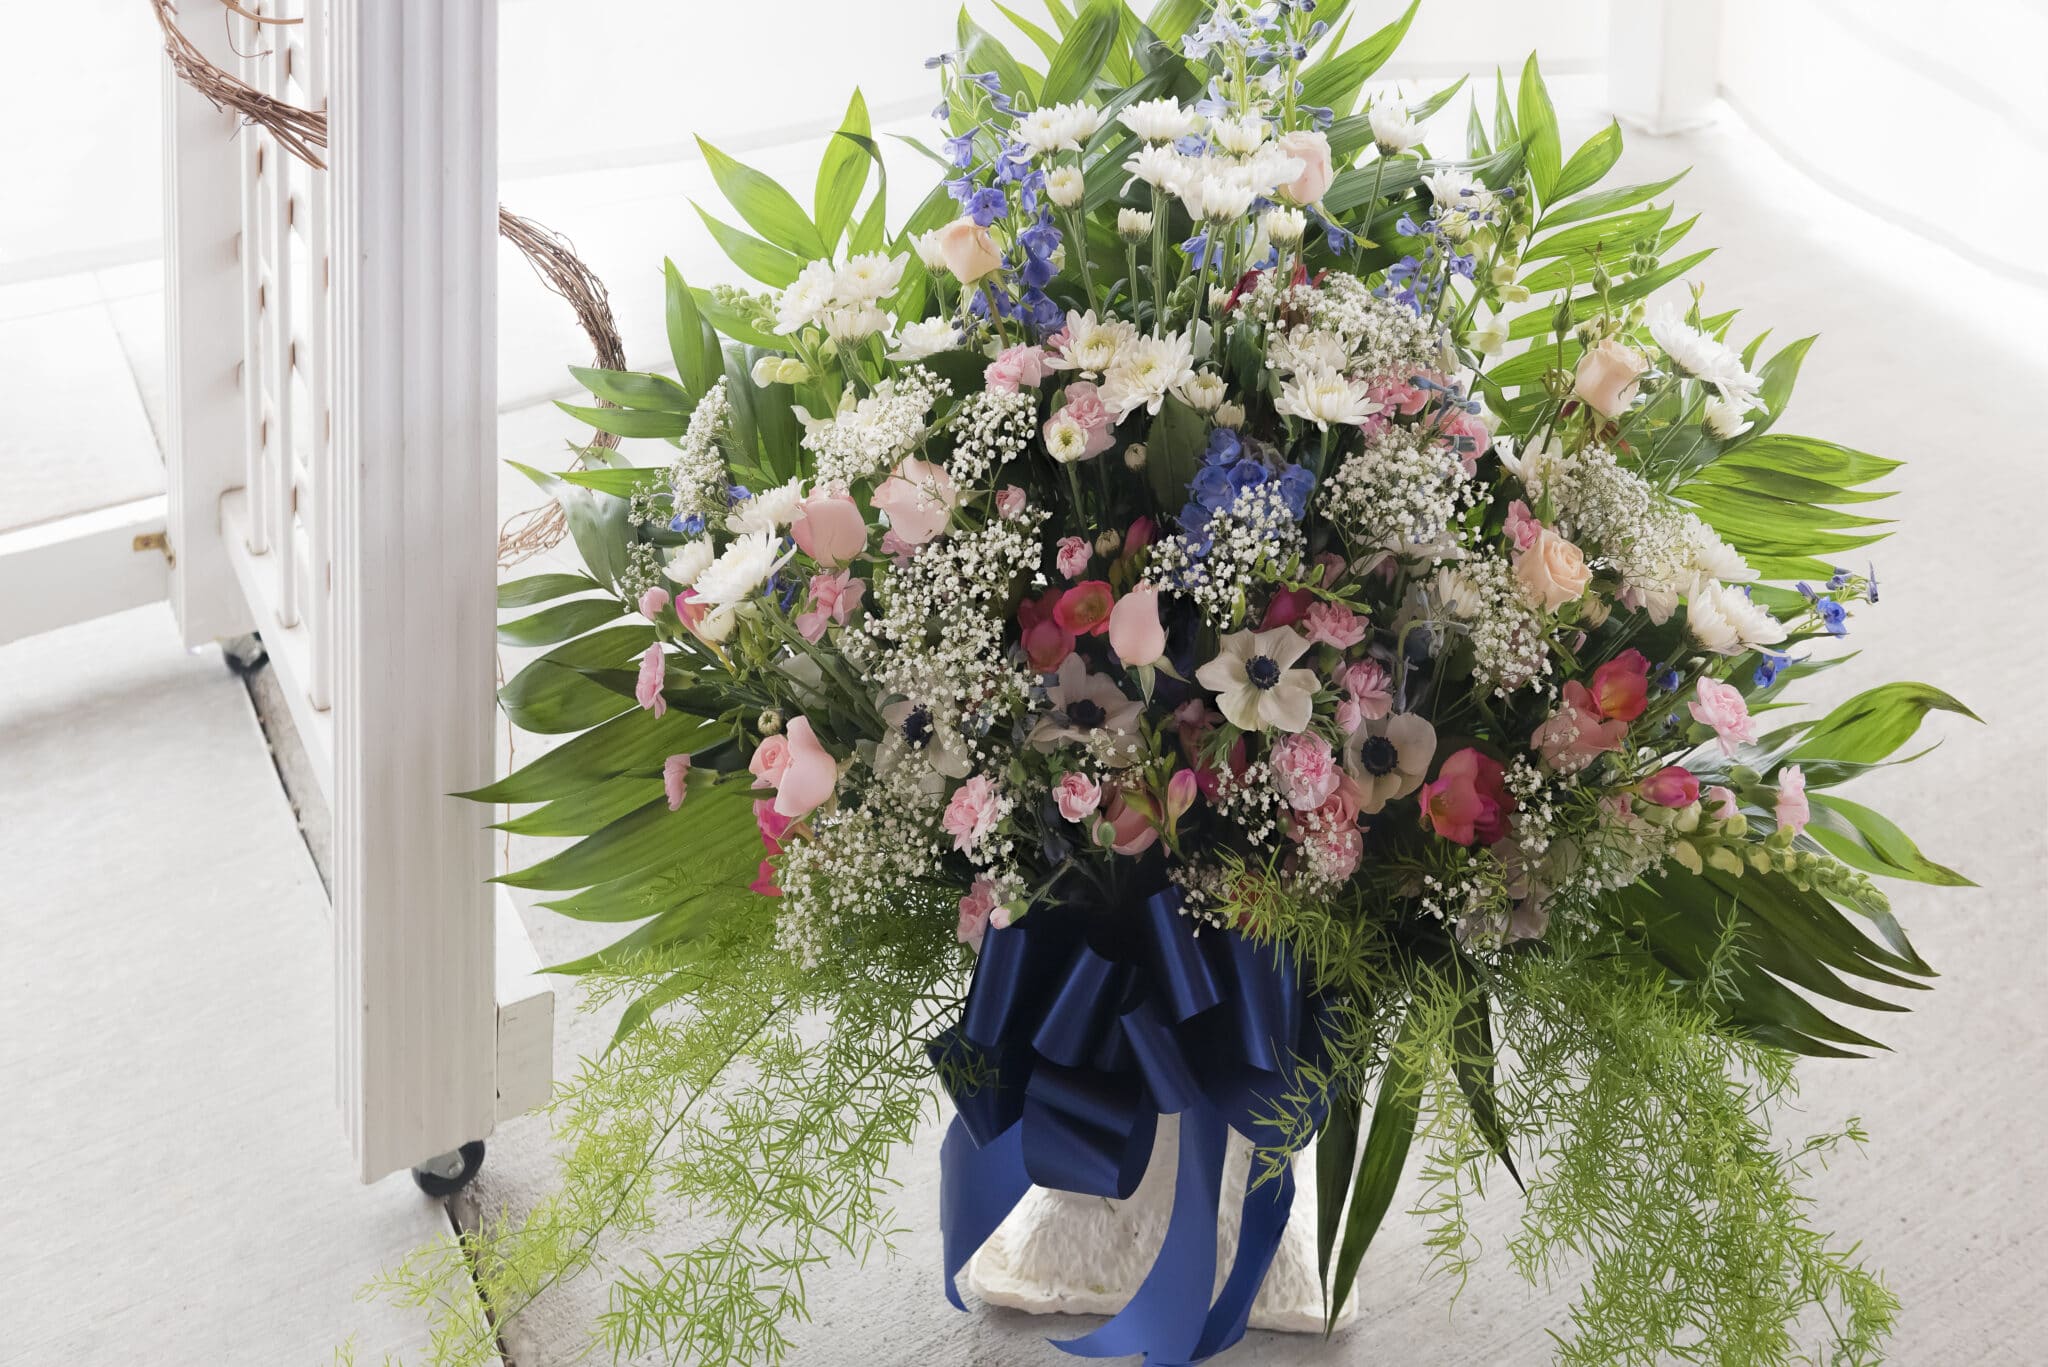 A wedding floral display on the ground at the front of the ceremony includes colors of navy, blue and white.